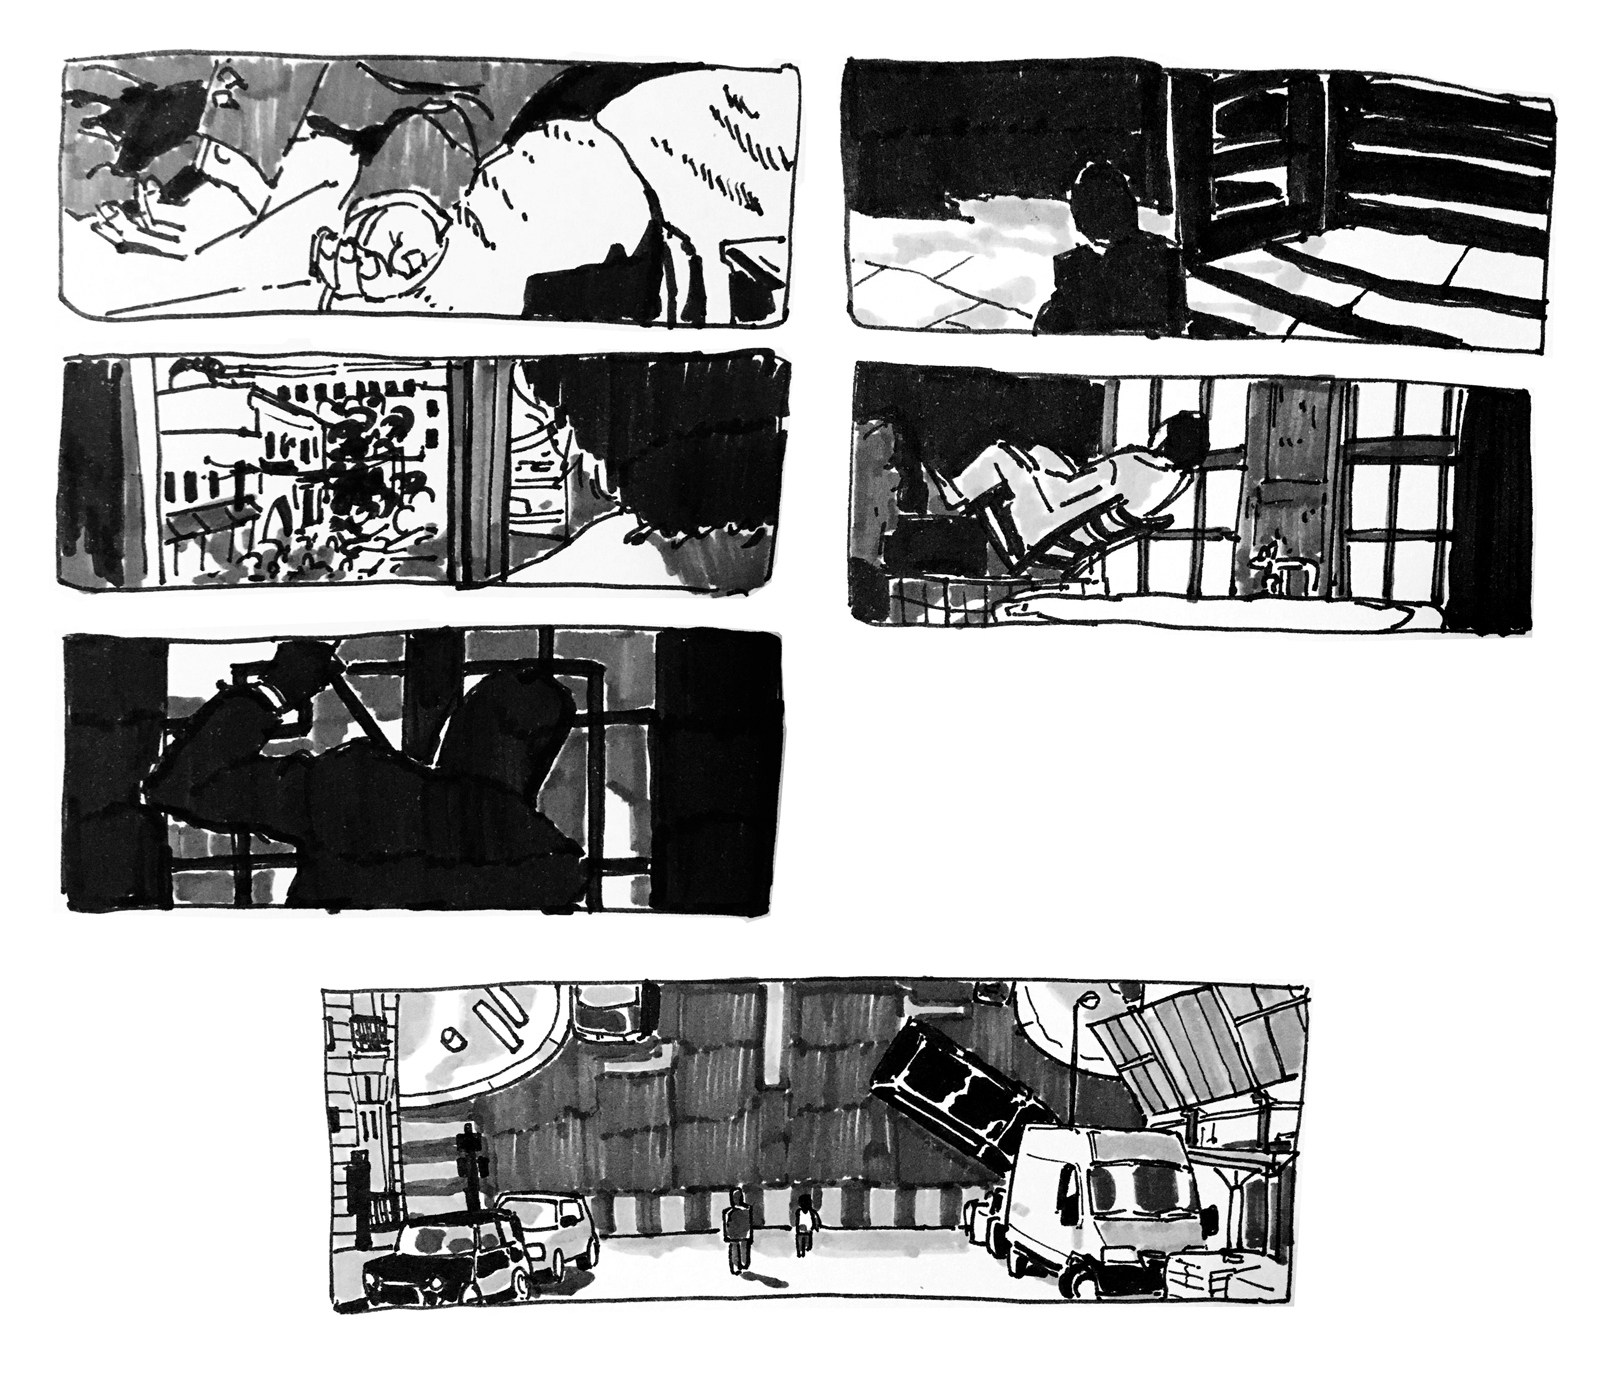 Ink studies, six frames. #1: A closeup of a figure’s hands, lying on a bed. #2: Someone looking out the window to a chaotic street. #3: A silhouette of a man in front of a window, holding something. #4: A shadowed figure at the bottom of some steps. #5: A man sitting in a chair, tipping backwards into a bathtub. #6: Two figures on a street that’s folded into a 90 degree angle towards them.